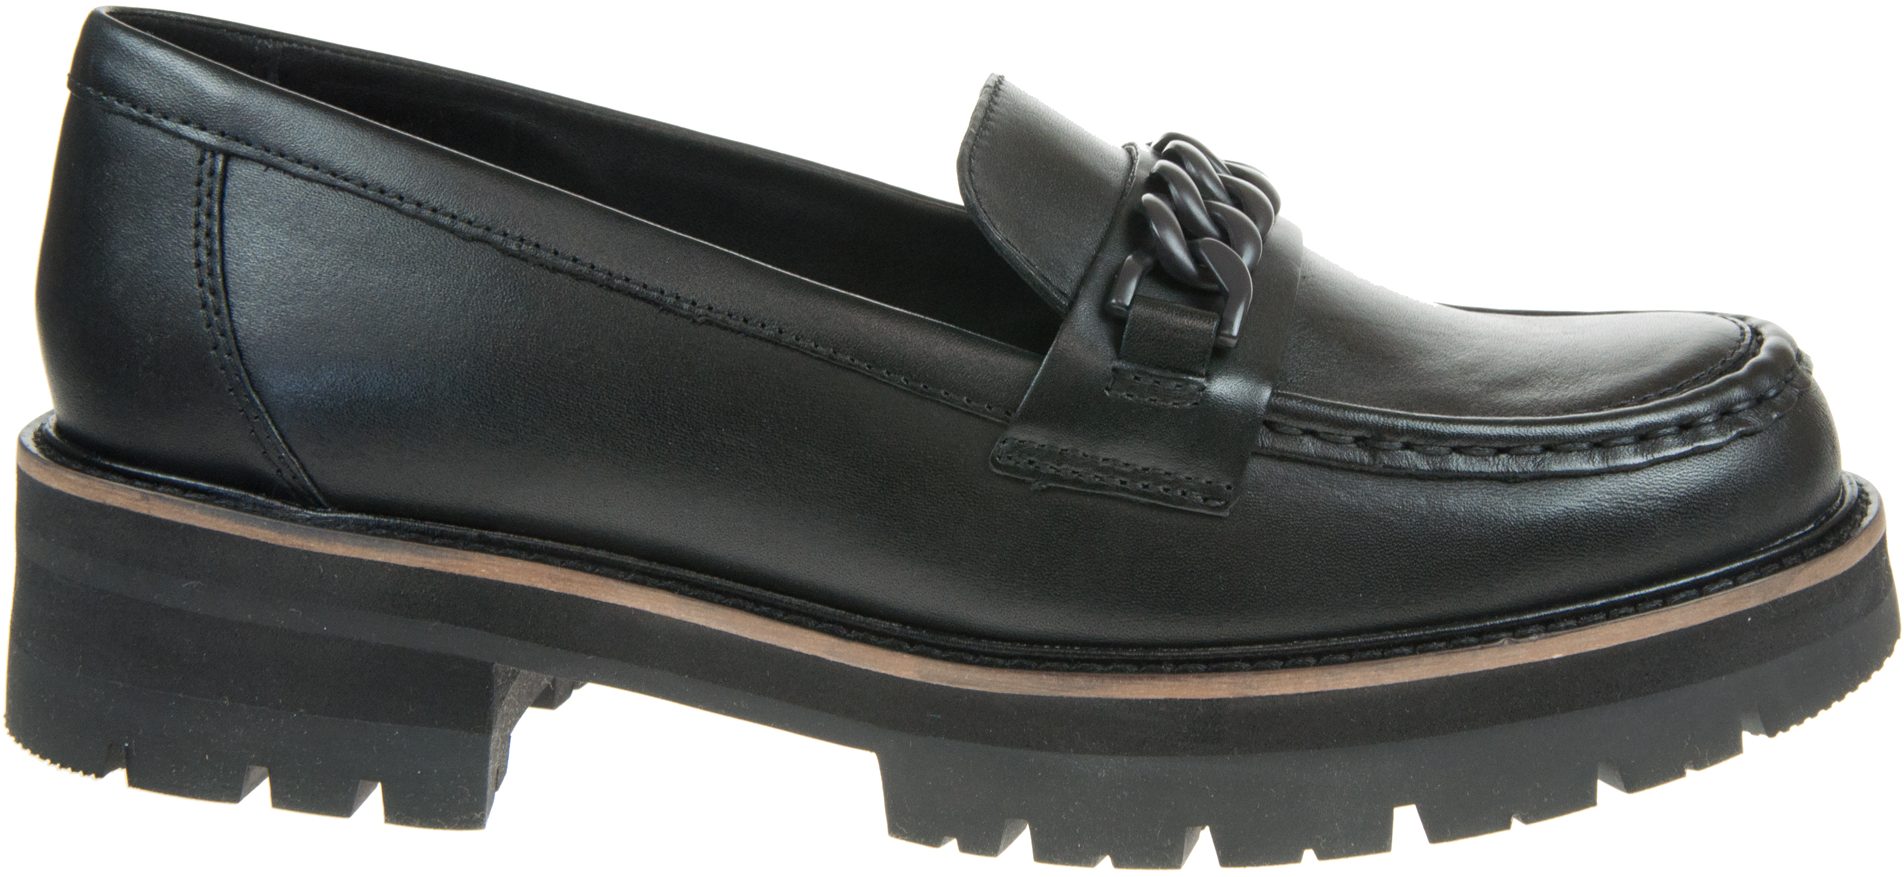 Clarks Orianna Edge Black Leather 26167817 - Everyday Shoes - Humphries ...